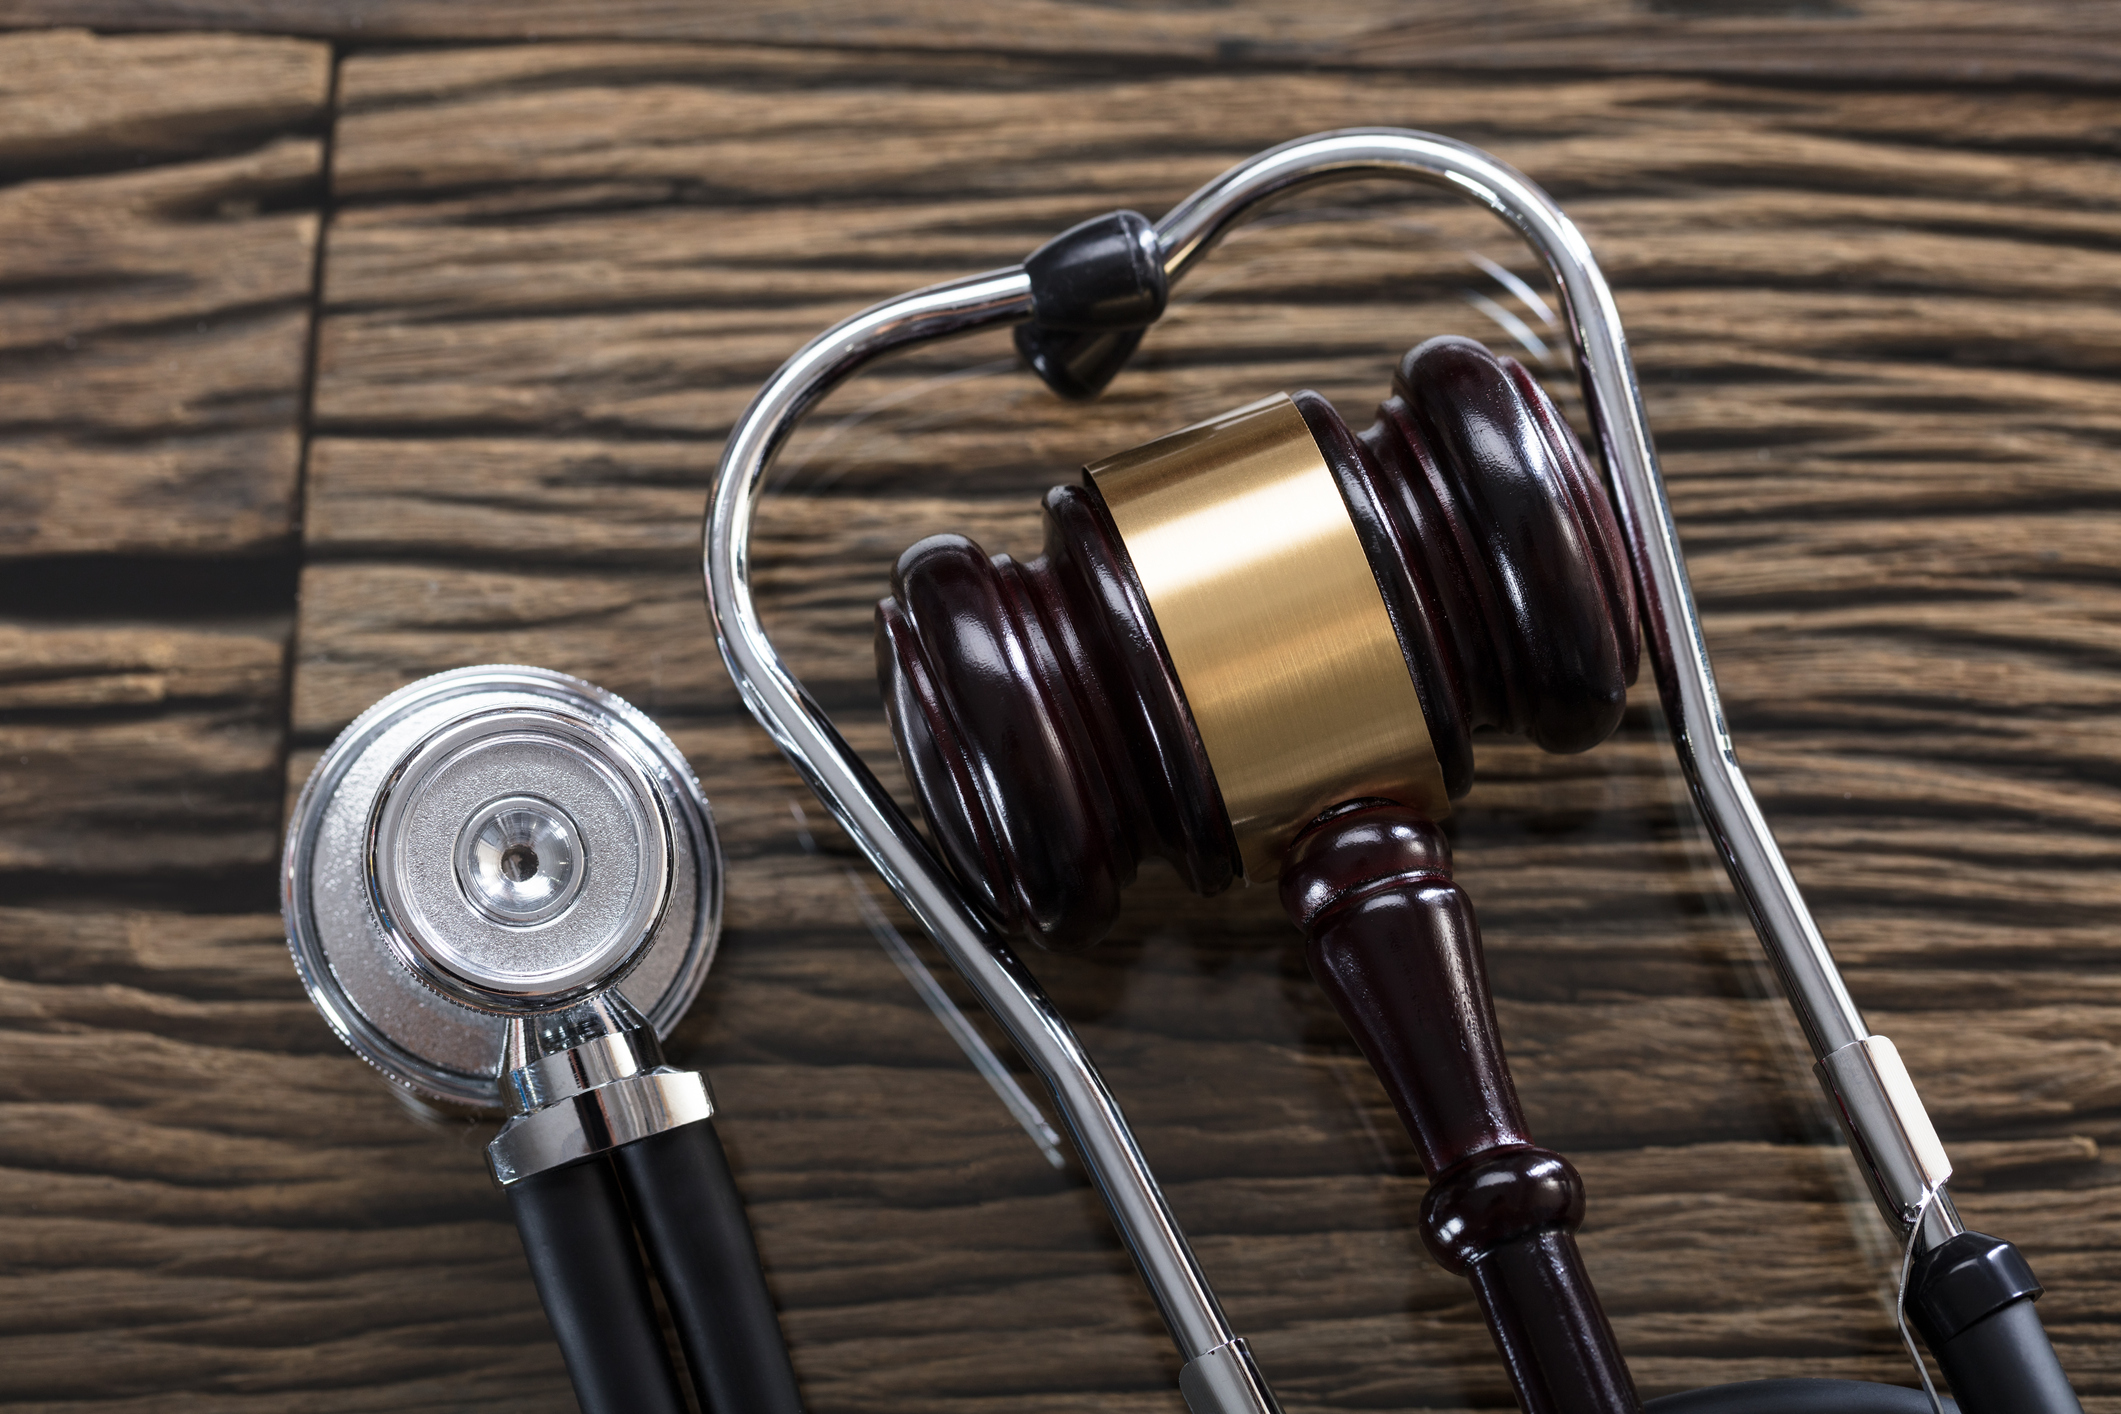 What kinds of damages are available to the plaintiff in a medical malpractice lawsuit?